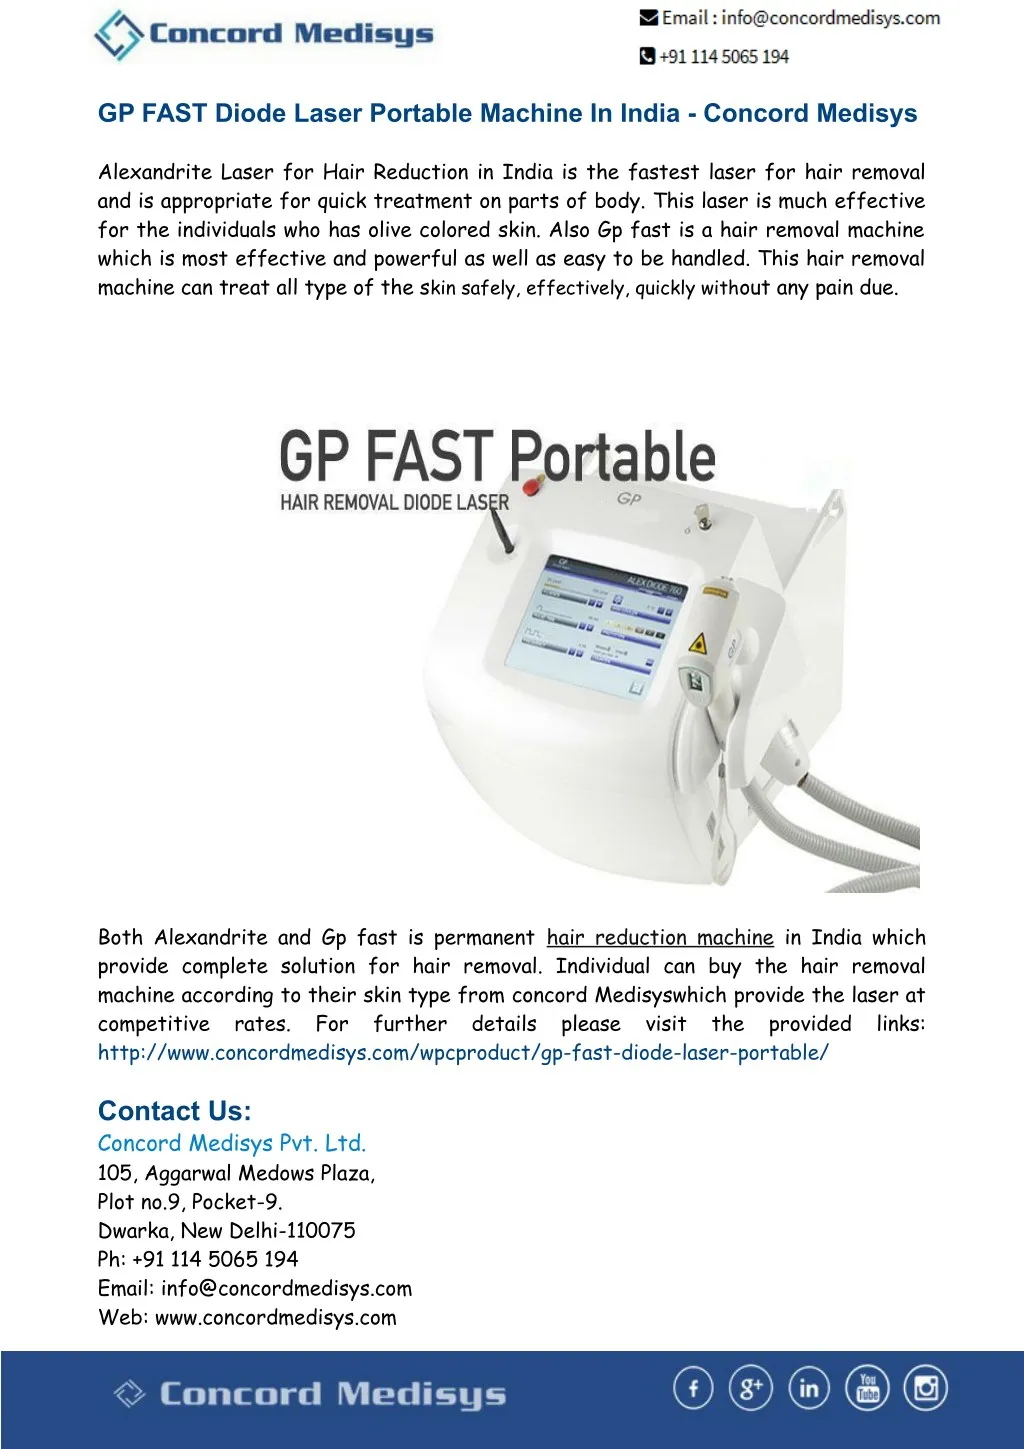 gp fast diode laser portable machine in india